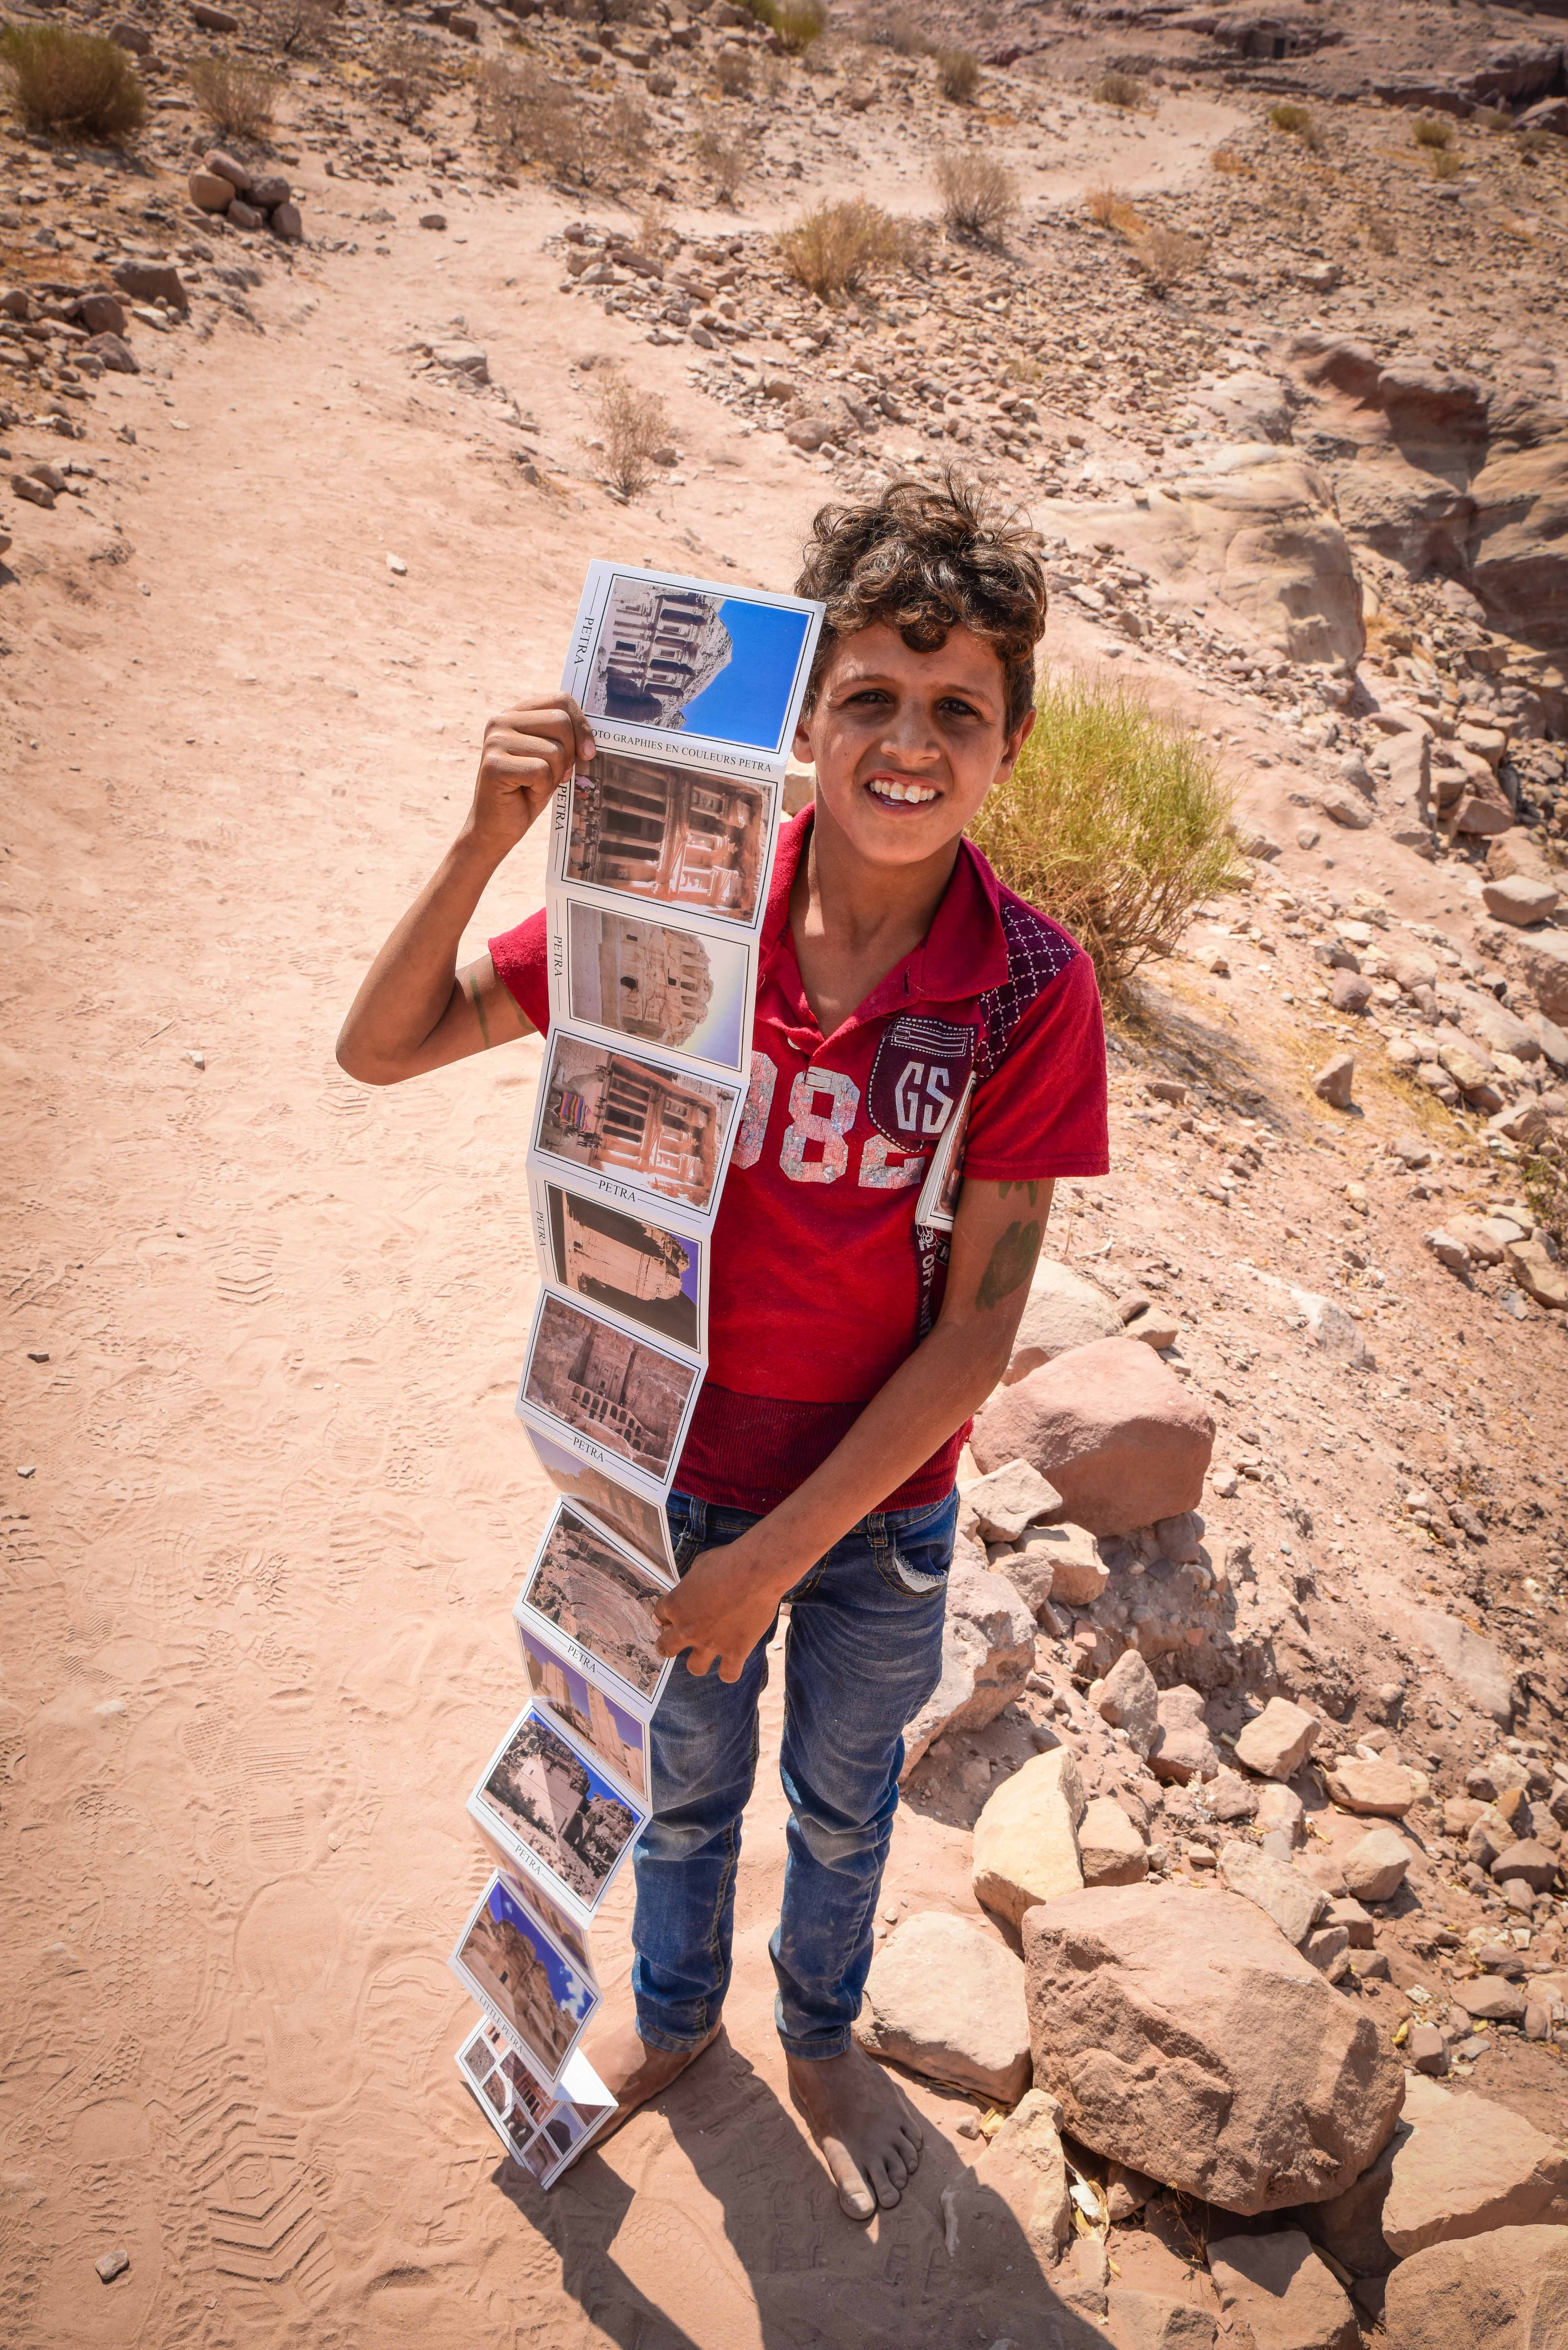 A young boy chased after us to sell his souvenir of Petra. (We ended up buying water from him instead.)